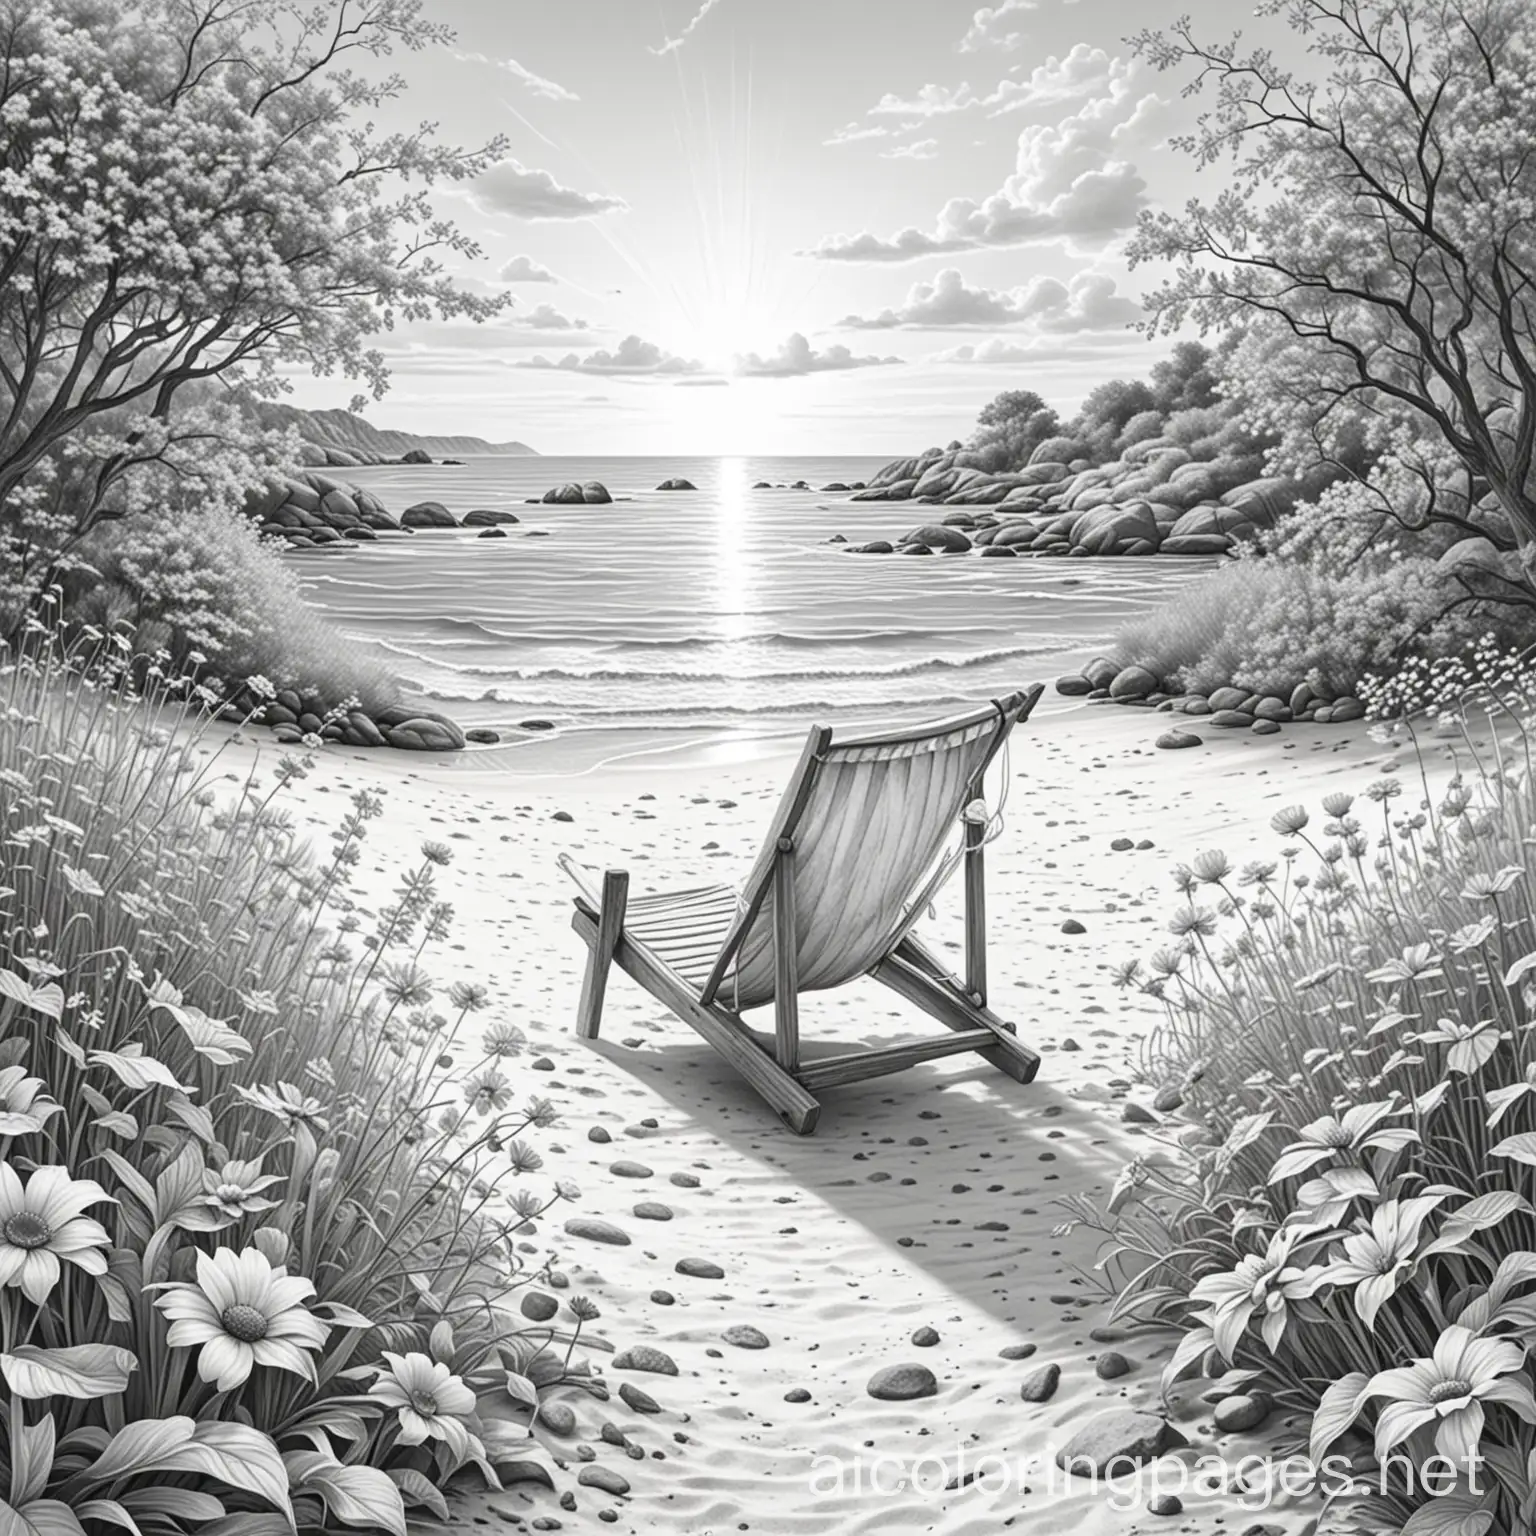 Grayscale summertime


, Coloring Page, black and white, line art, white background, Simplicity, Ample White Space. The background of the coloring page is plain white to make it easy for young children to color within the lines. The outlines of all the subjects are easy to distinguish, making it simple for kids to color without too much difficulty